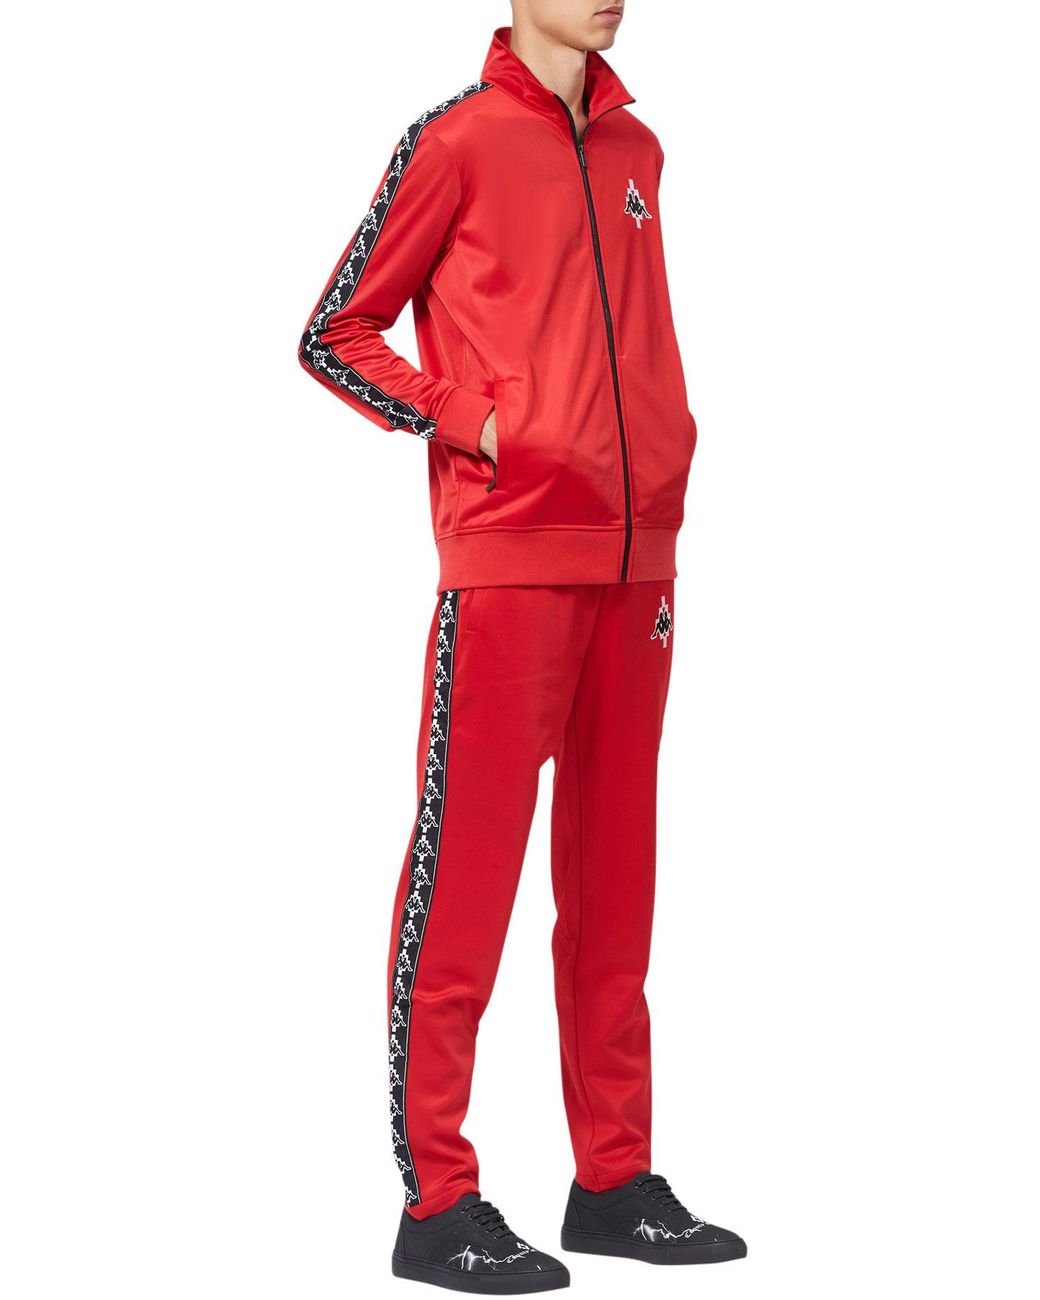 Kappa Wise Red Popper Track Pants  Urban Outfitters UK